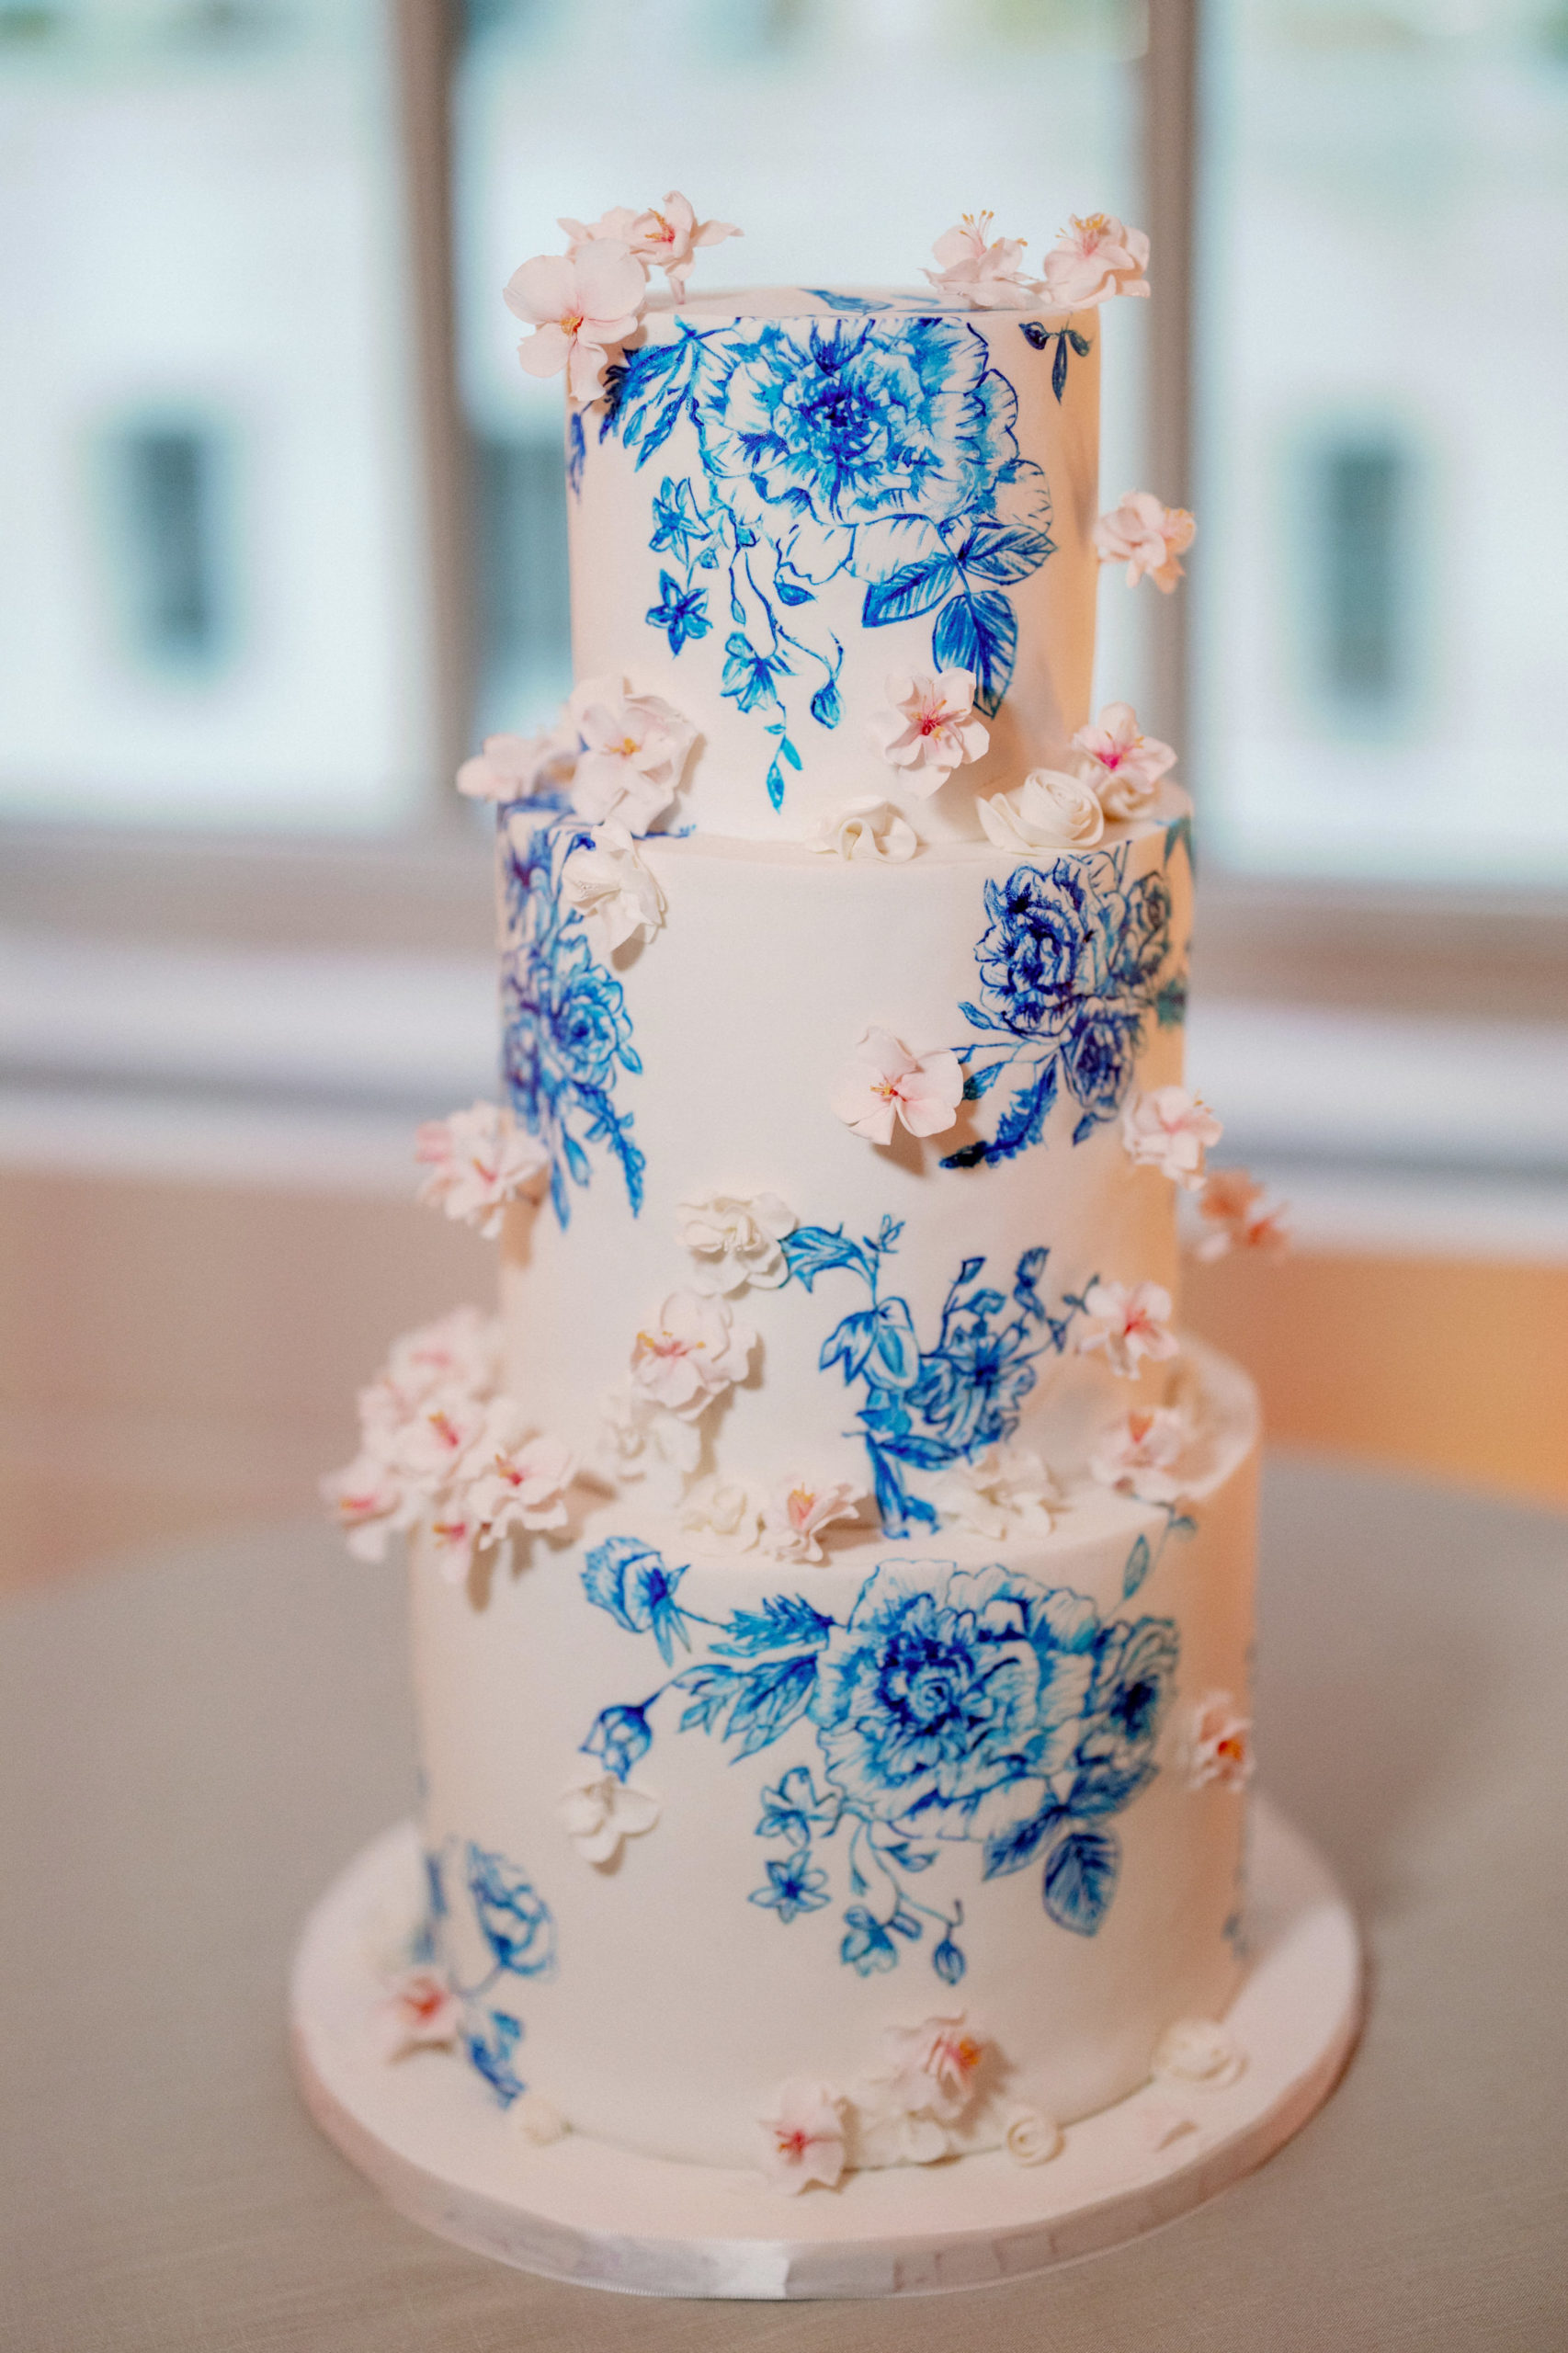 A beautiful, hand-painted wedding cake from The Cake Fairy. Image by Jenny Fu Studio NYC